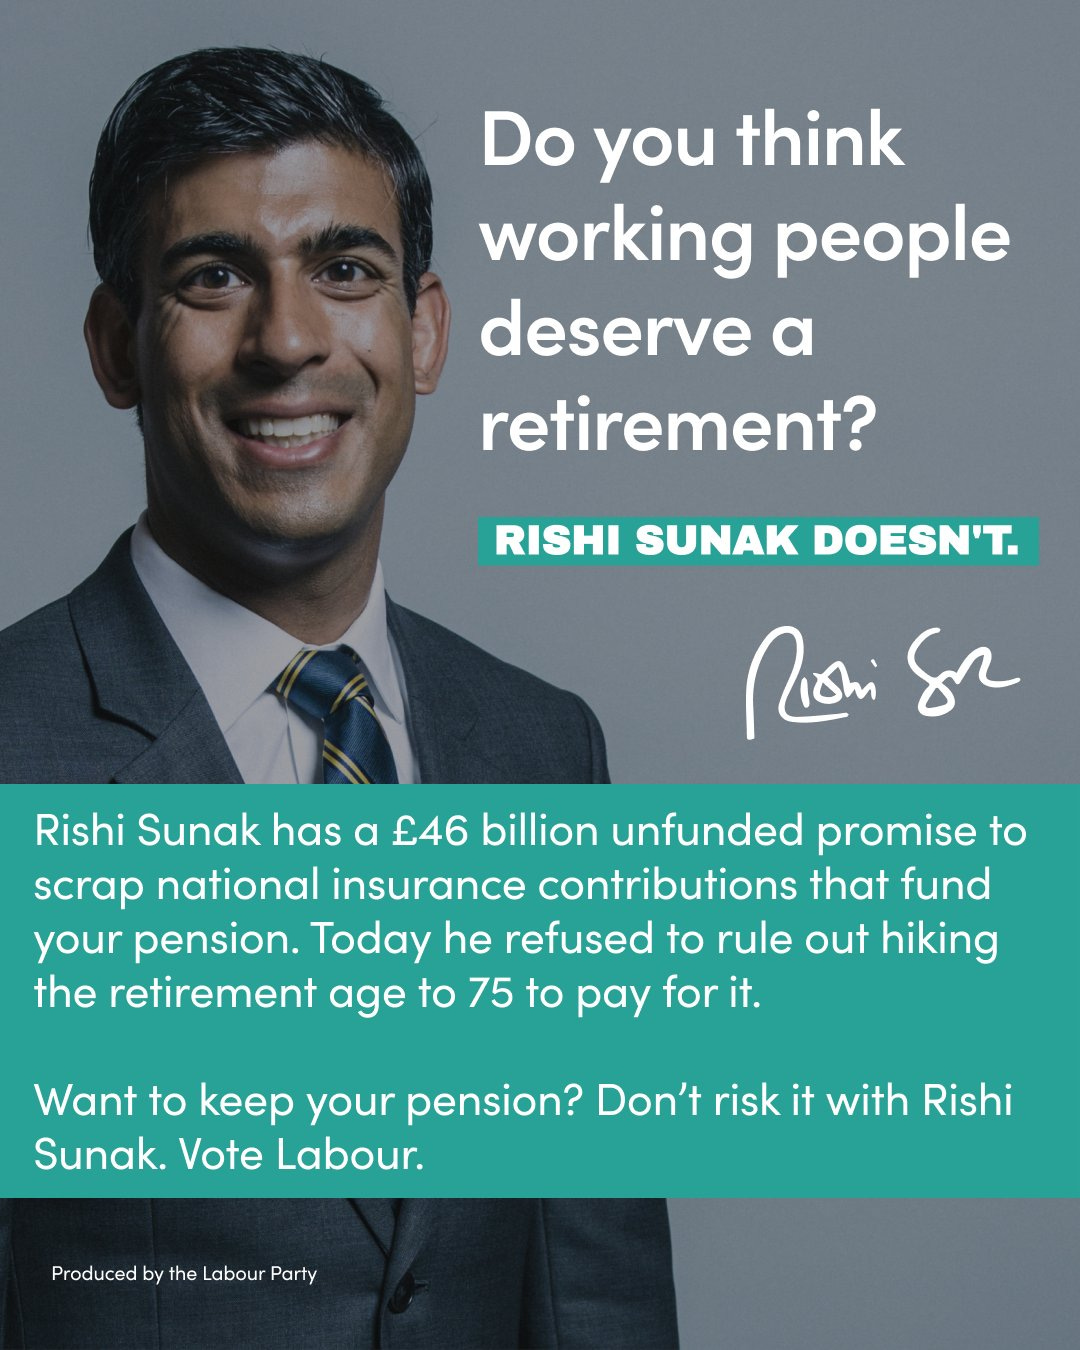 Do you think working people deserve a retirement?

Rishi Sunak doesn't.

Rishi Sunak has a £46 billion unfunded promise to scrap national insurance contributions that fund your pension. Today he refused to rule out hiking the retirement age to 75 to pay for it.

Want to keep your pension? Don’t risk it with Rishi Sunak. Vote Labour.